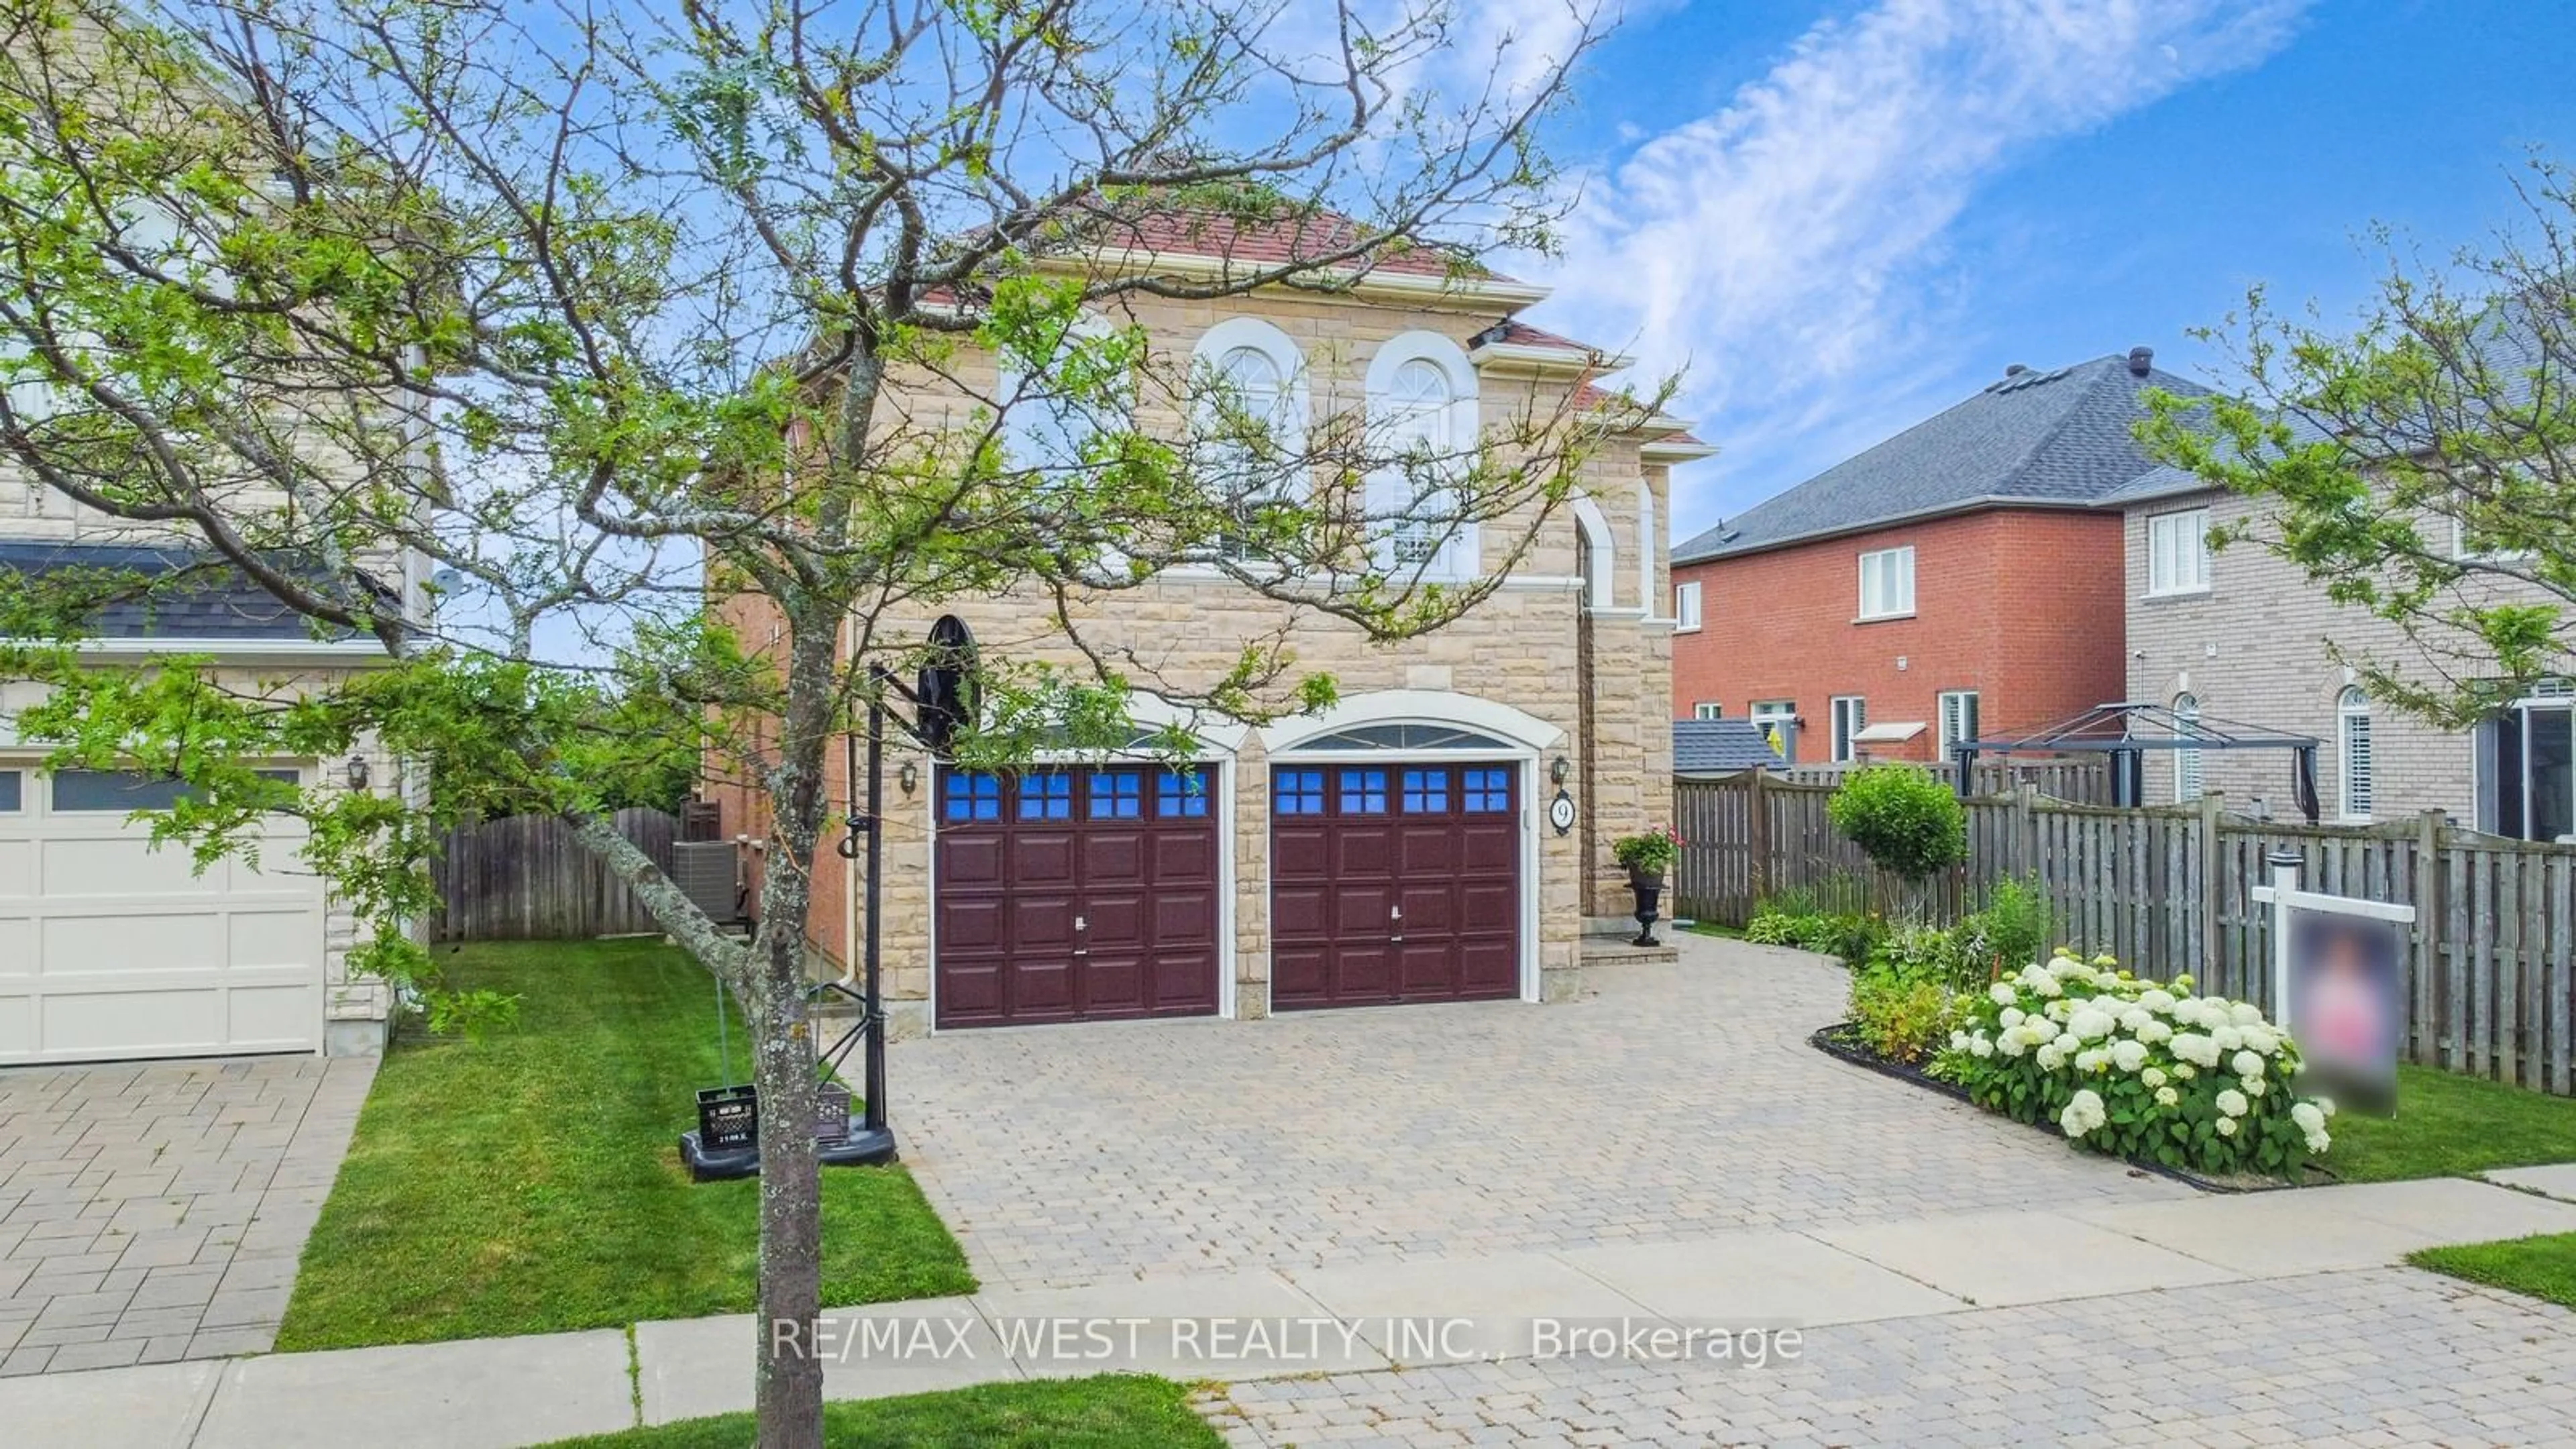 Home with brick exterior material for 9 Brass Dr, Richmond Hill Ontario L4E 4T3